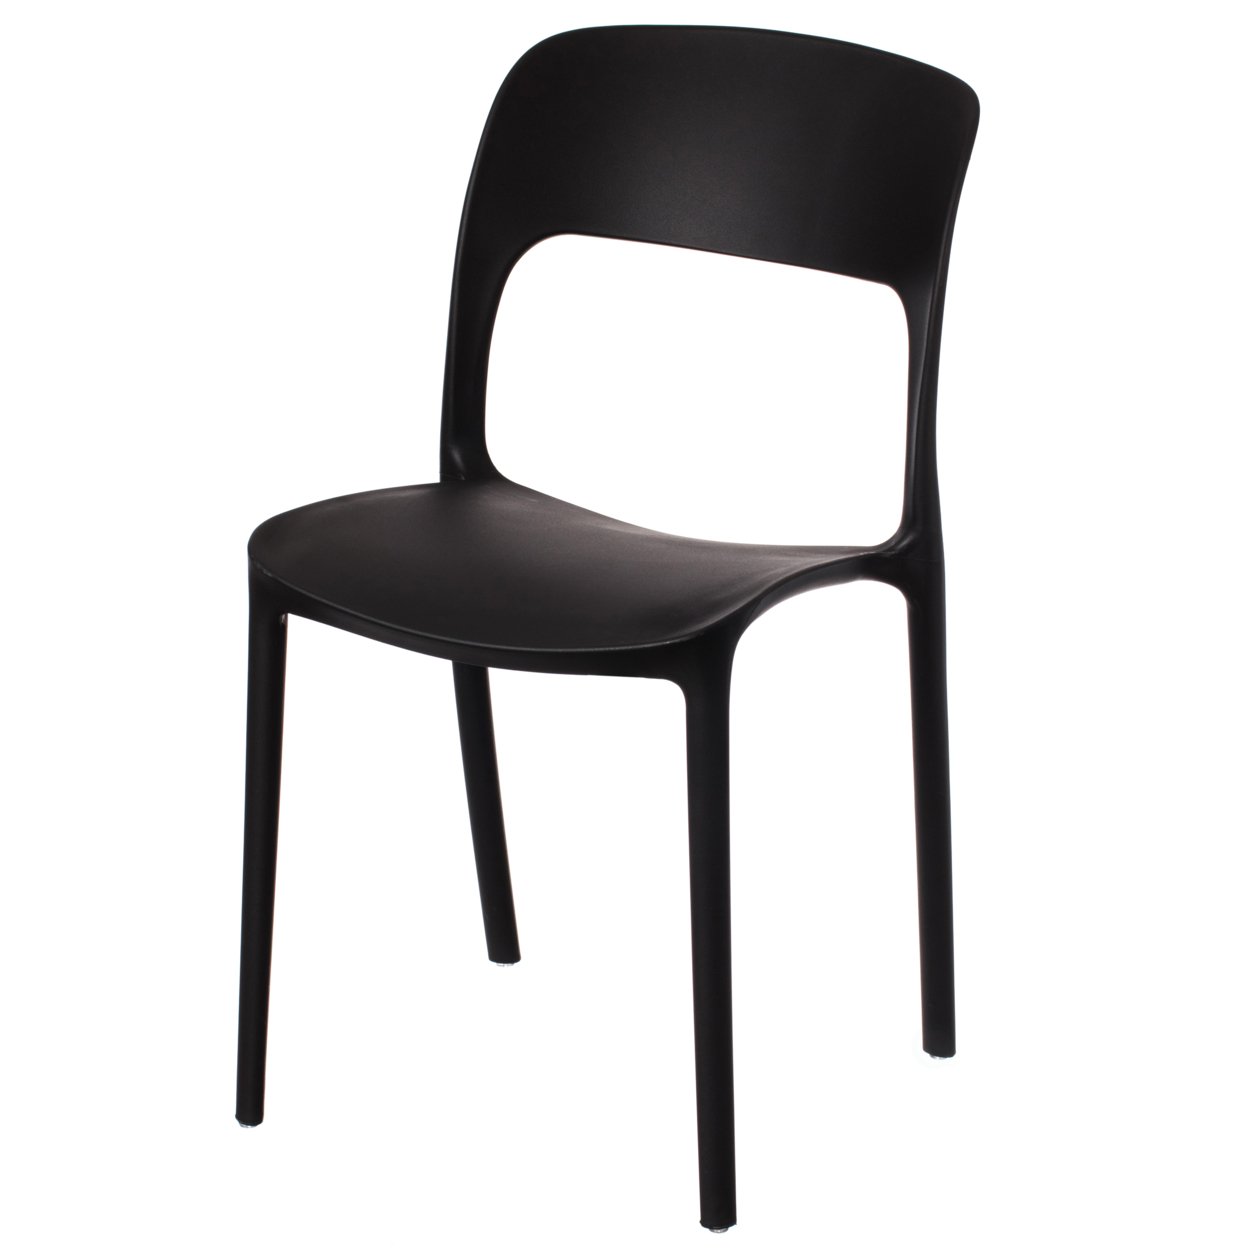 Modern Plastic Outdoor Dining Chair With Open Curved Back - Set Of 4 Black